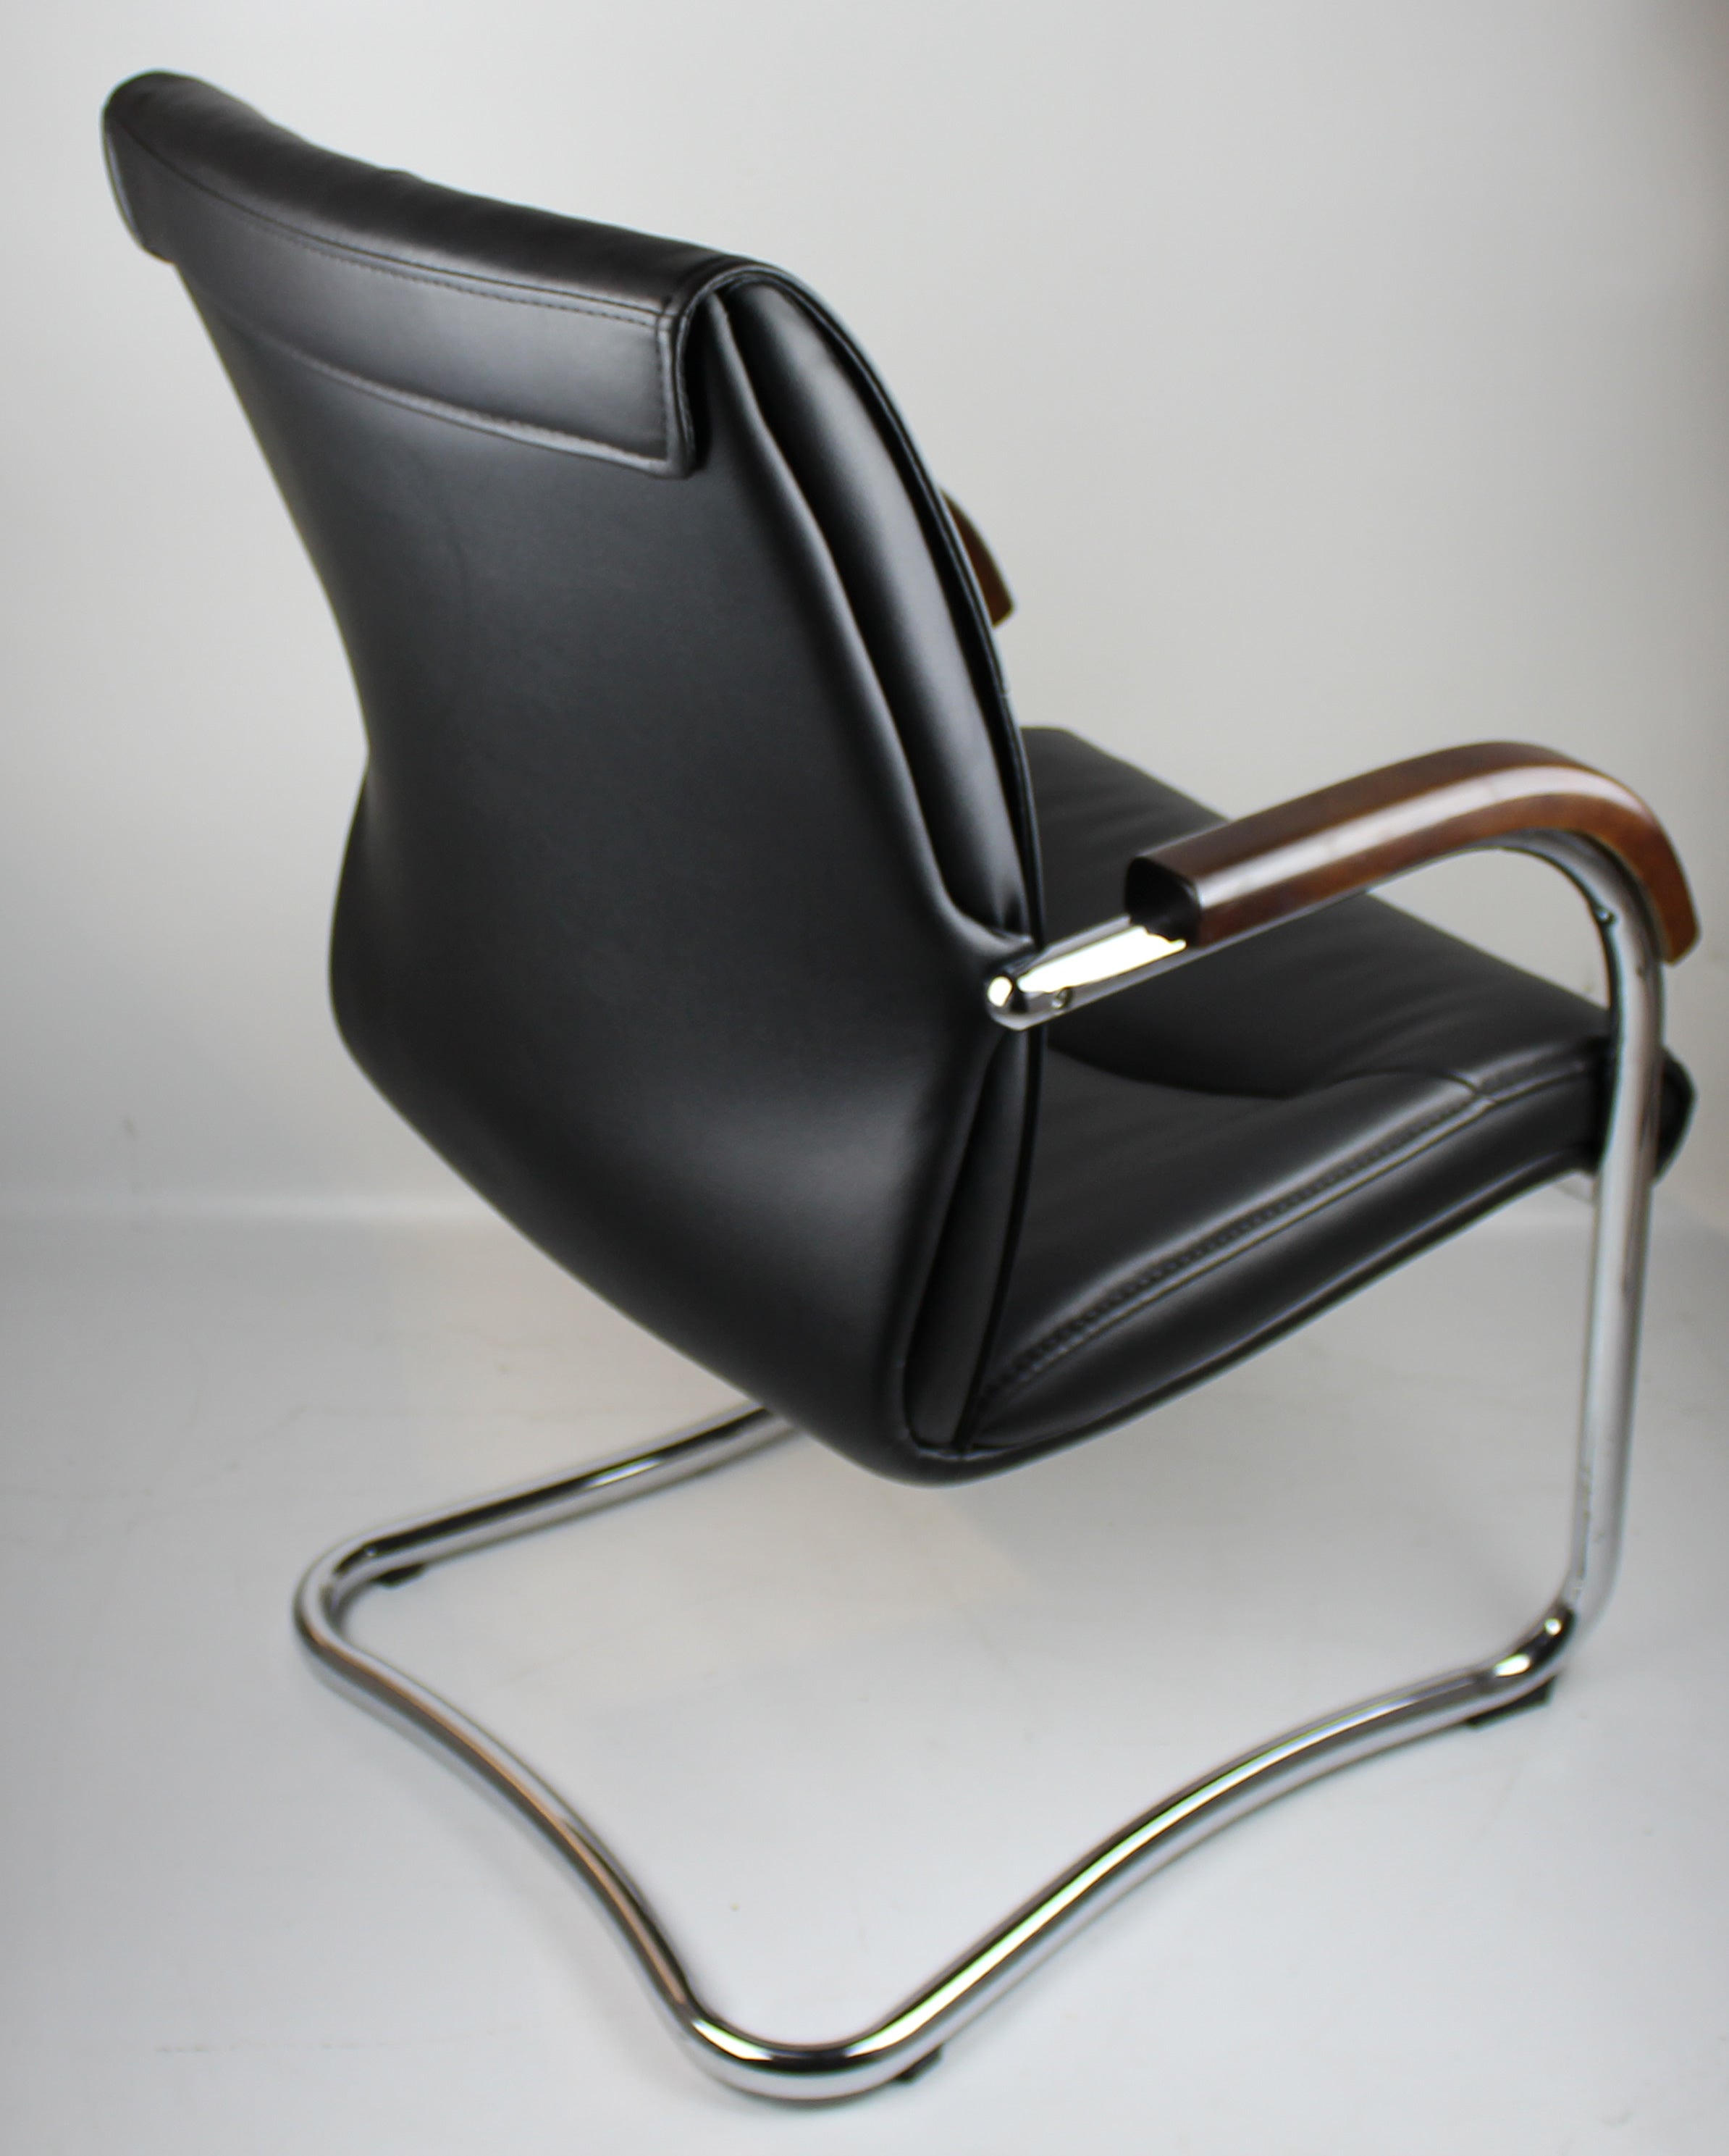 Stylish Black Leather Office Visitor Chair - 6161-BLACK